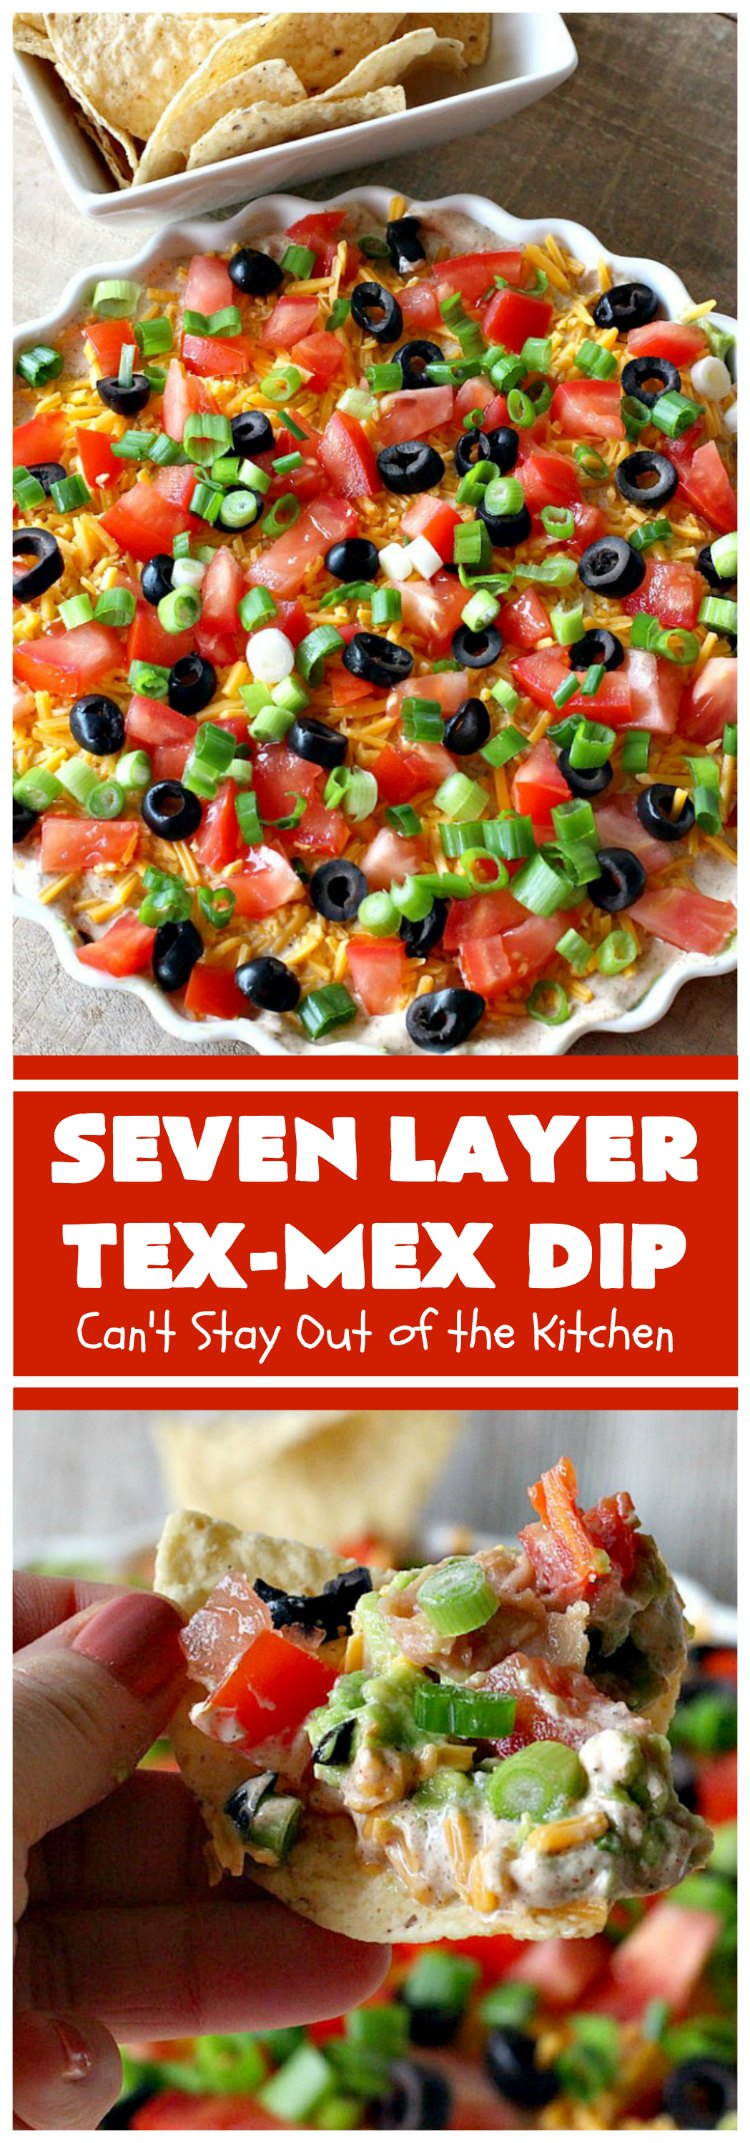 Seven Layer Tex-Mex Dip | Can't Stay Out of the Kitchen | this awesome #TexMex #dip is out of this world. It's terrific for any kind of company or #holiday party. We like it for #tailgating parties & potlucks. Also great for summer #holidays like #FourthOfJuly. #GlutenFree #Mexican #TexMexDip #LayeredMexicanDip #RefriedBeans #Jalapenos #Olives #CheddarCheese #Guacamole #TortillaChips #tomatoes #Avocados #SevenLayerTexMexDip #appetizer #TexMexAppetizer